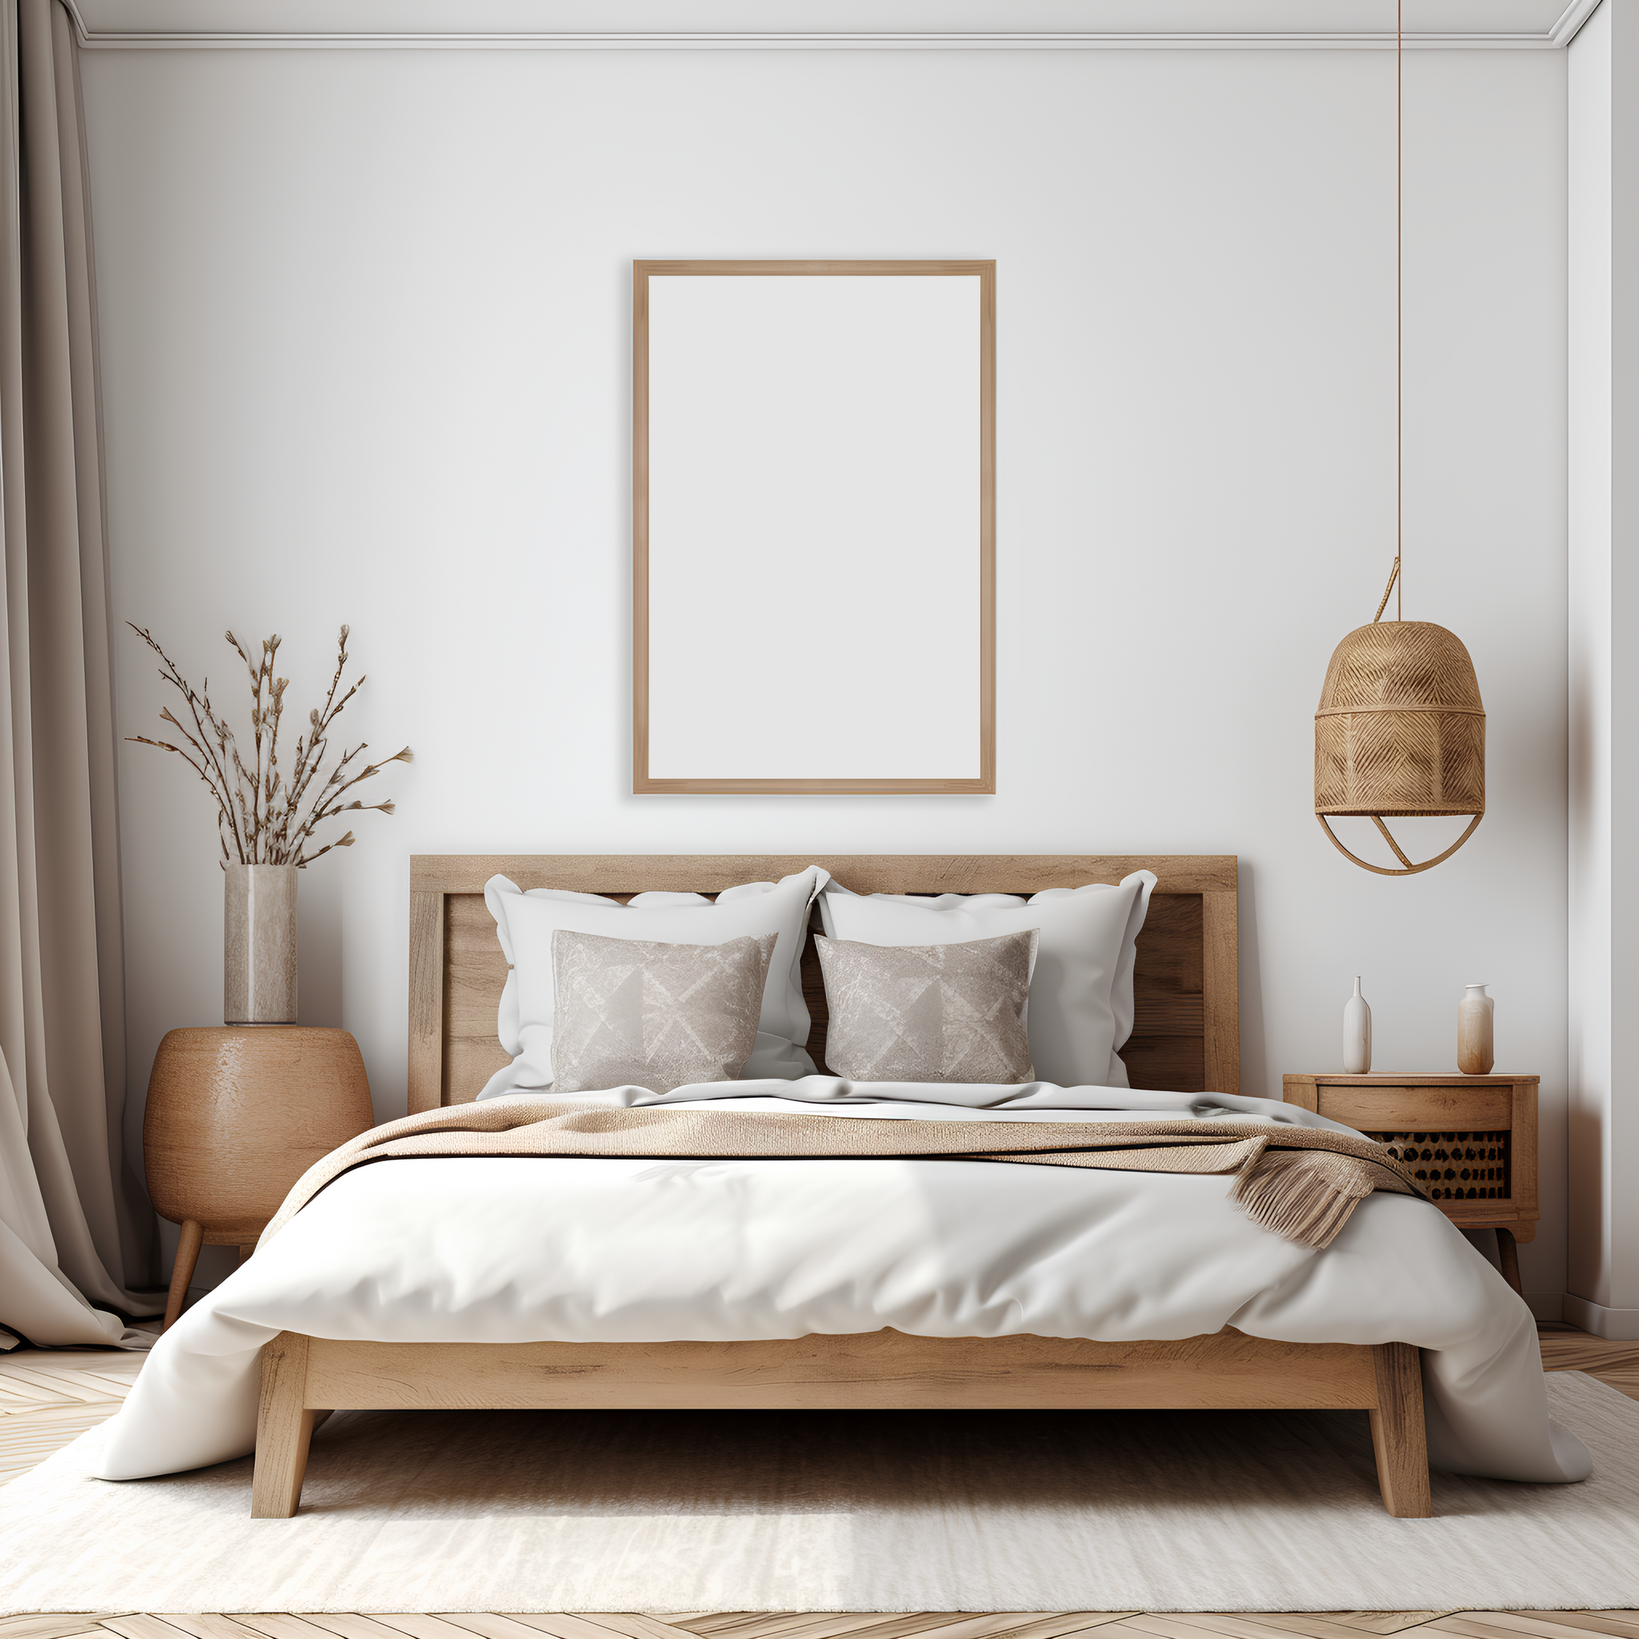 Picture Frame Mockup in a Bedroom